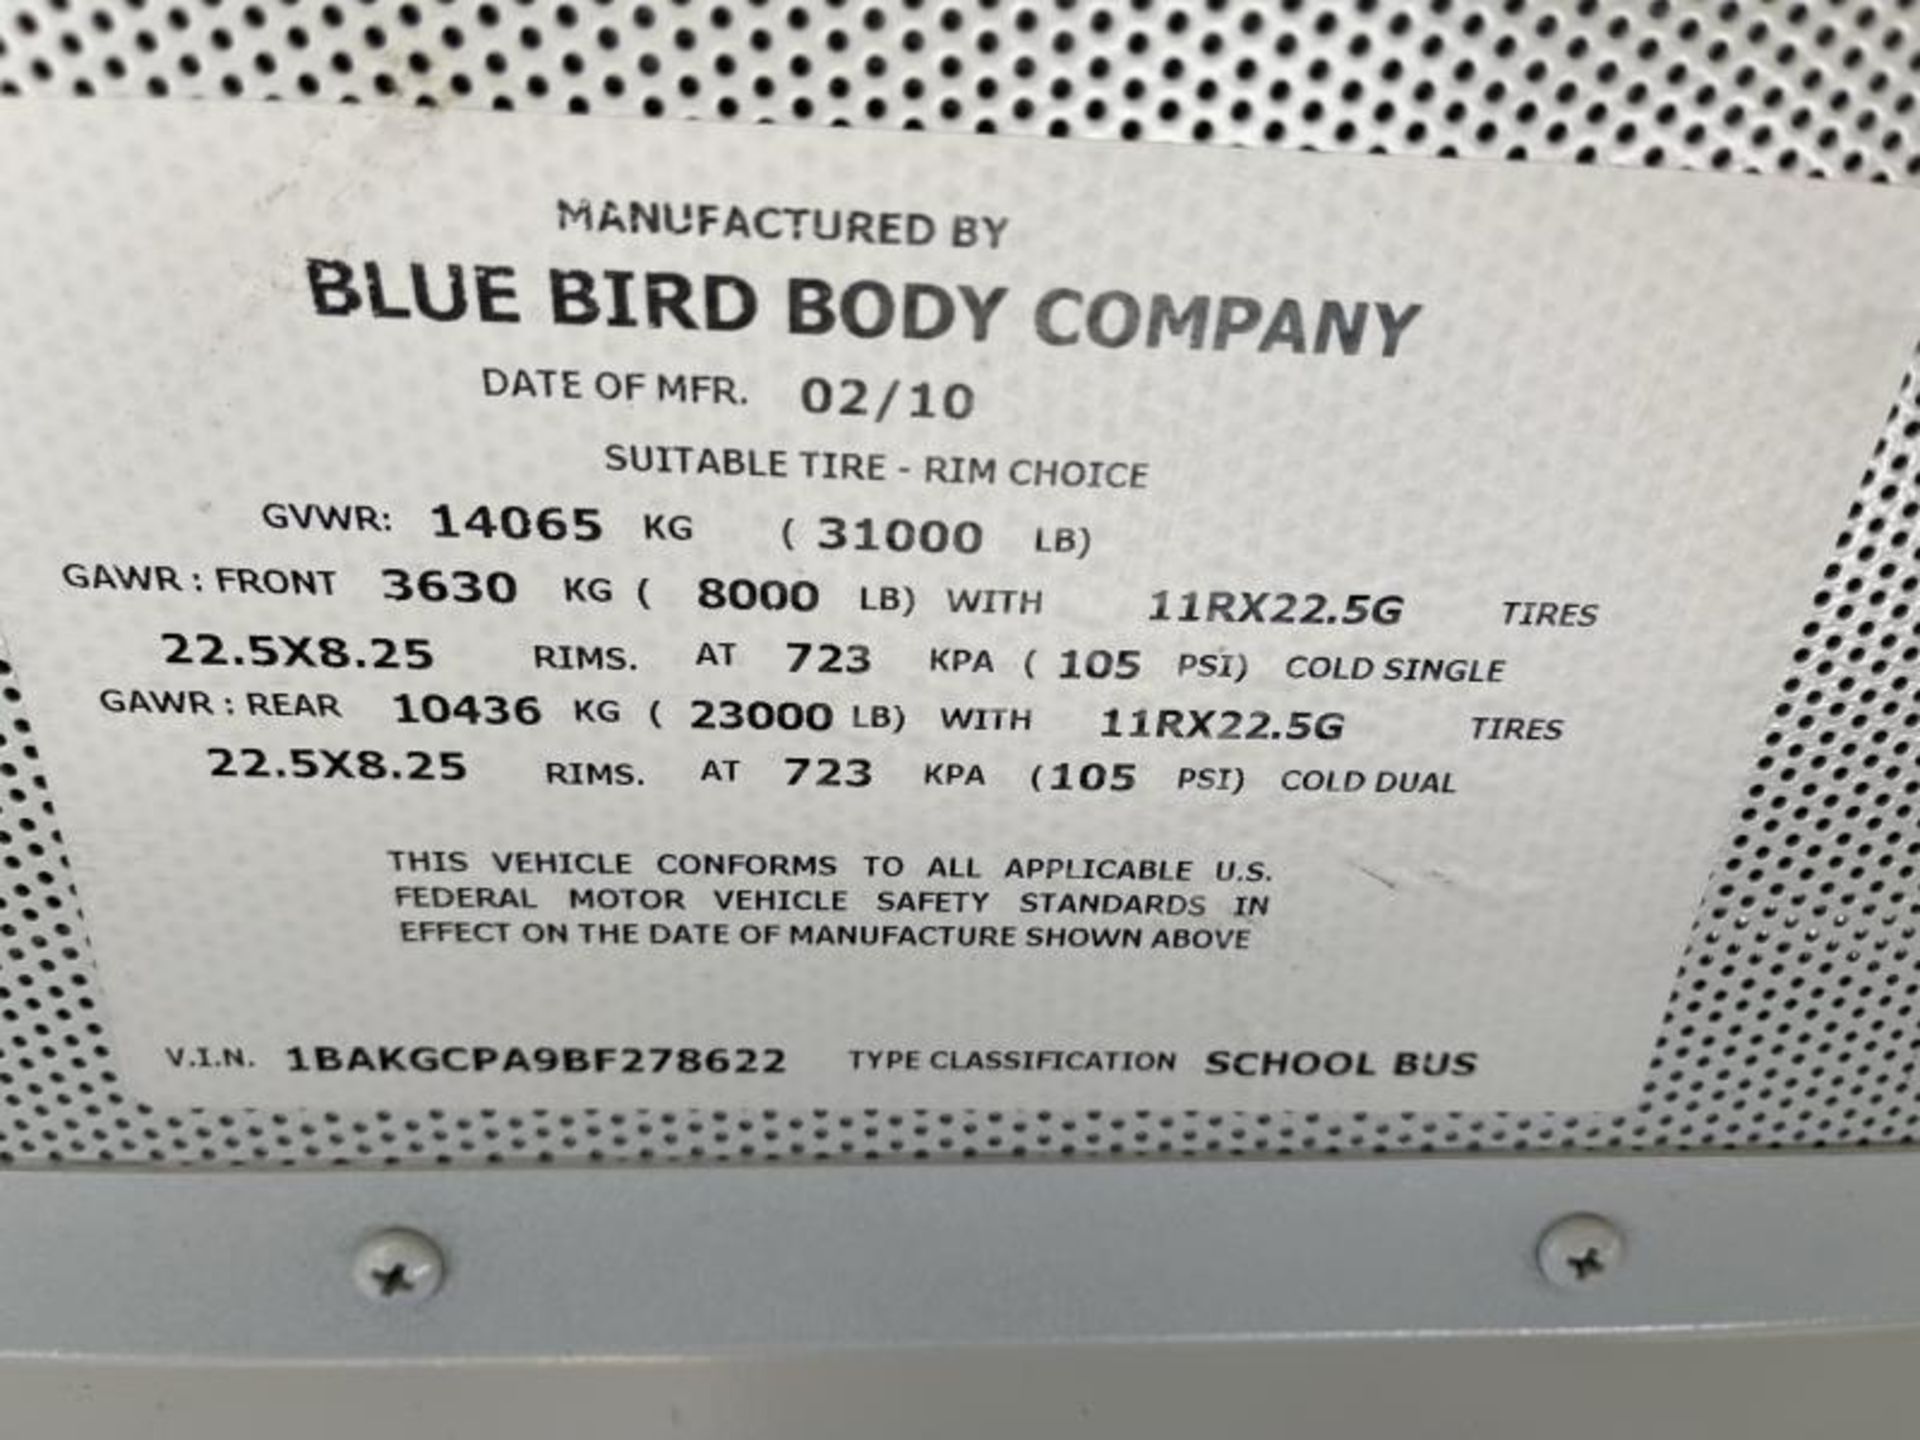 2011 Blue Bird Bus, Odometer Reads 193,151, Engine Starts, New Batteries, VIN: 1BAKGCPA9BF278622 - Image 38 of 40